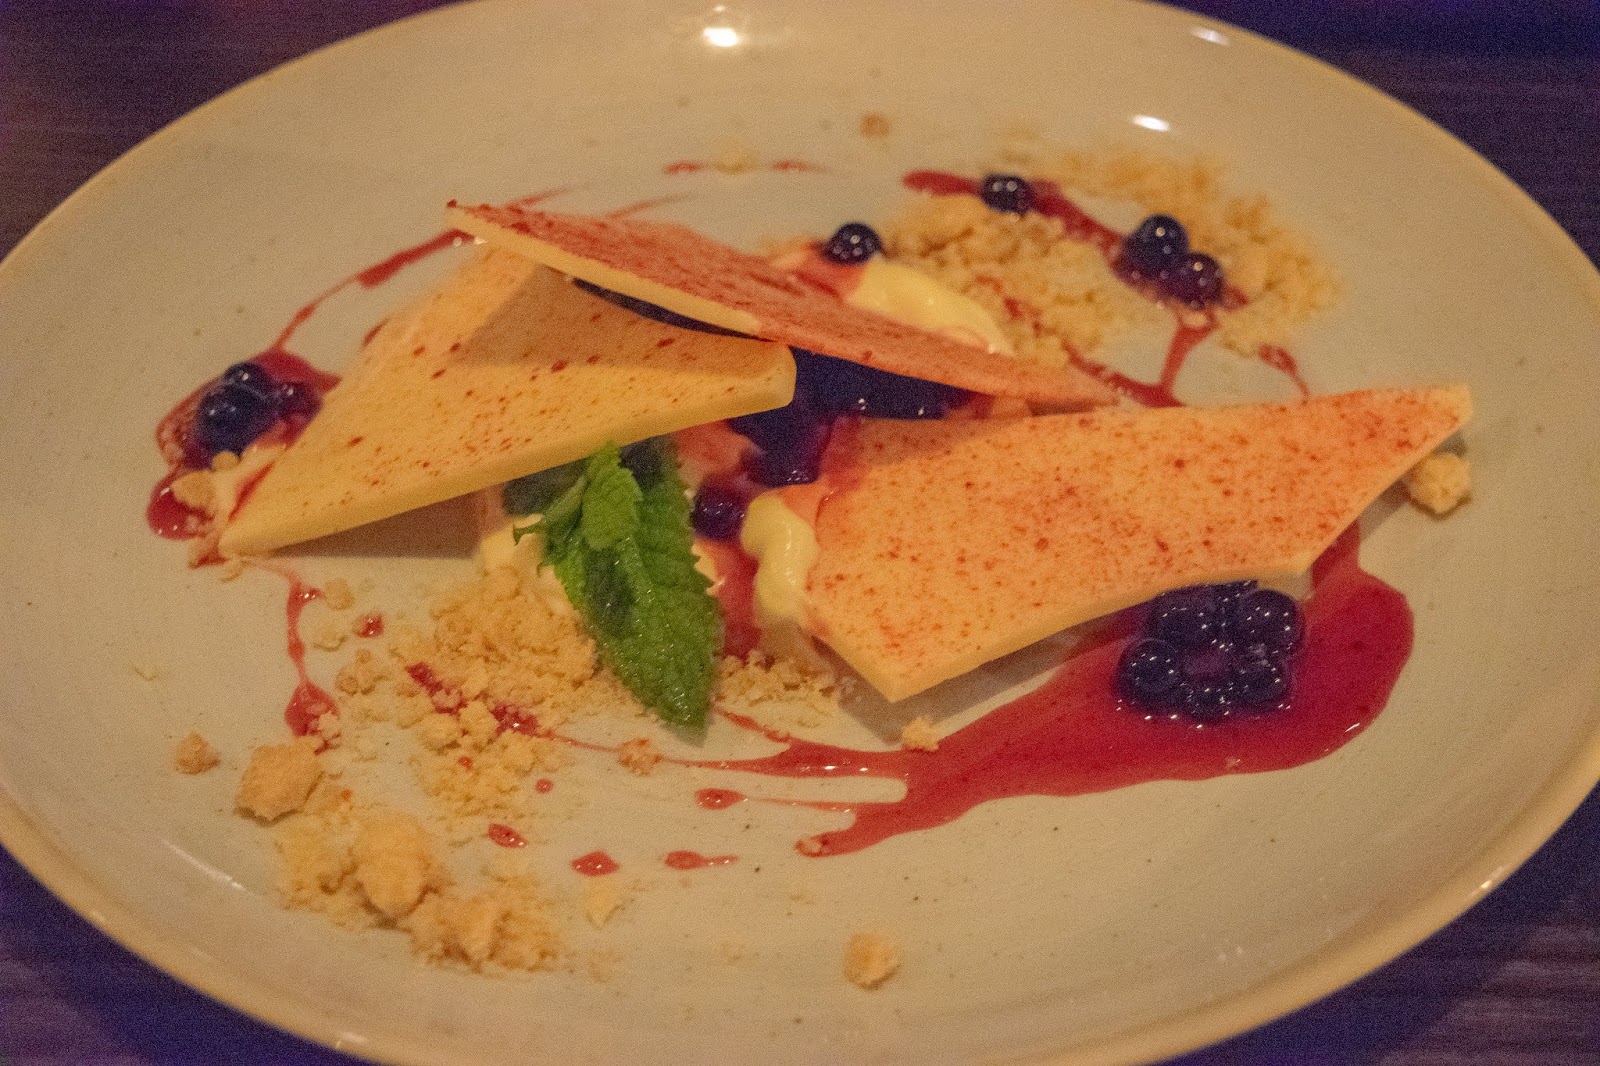 A deconstructed cheese cake with slabs of white chocolate, crumble, blackberries and red fruit sauce covering the chocolate.